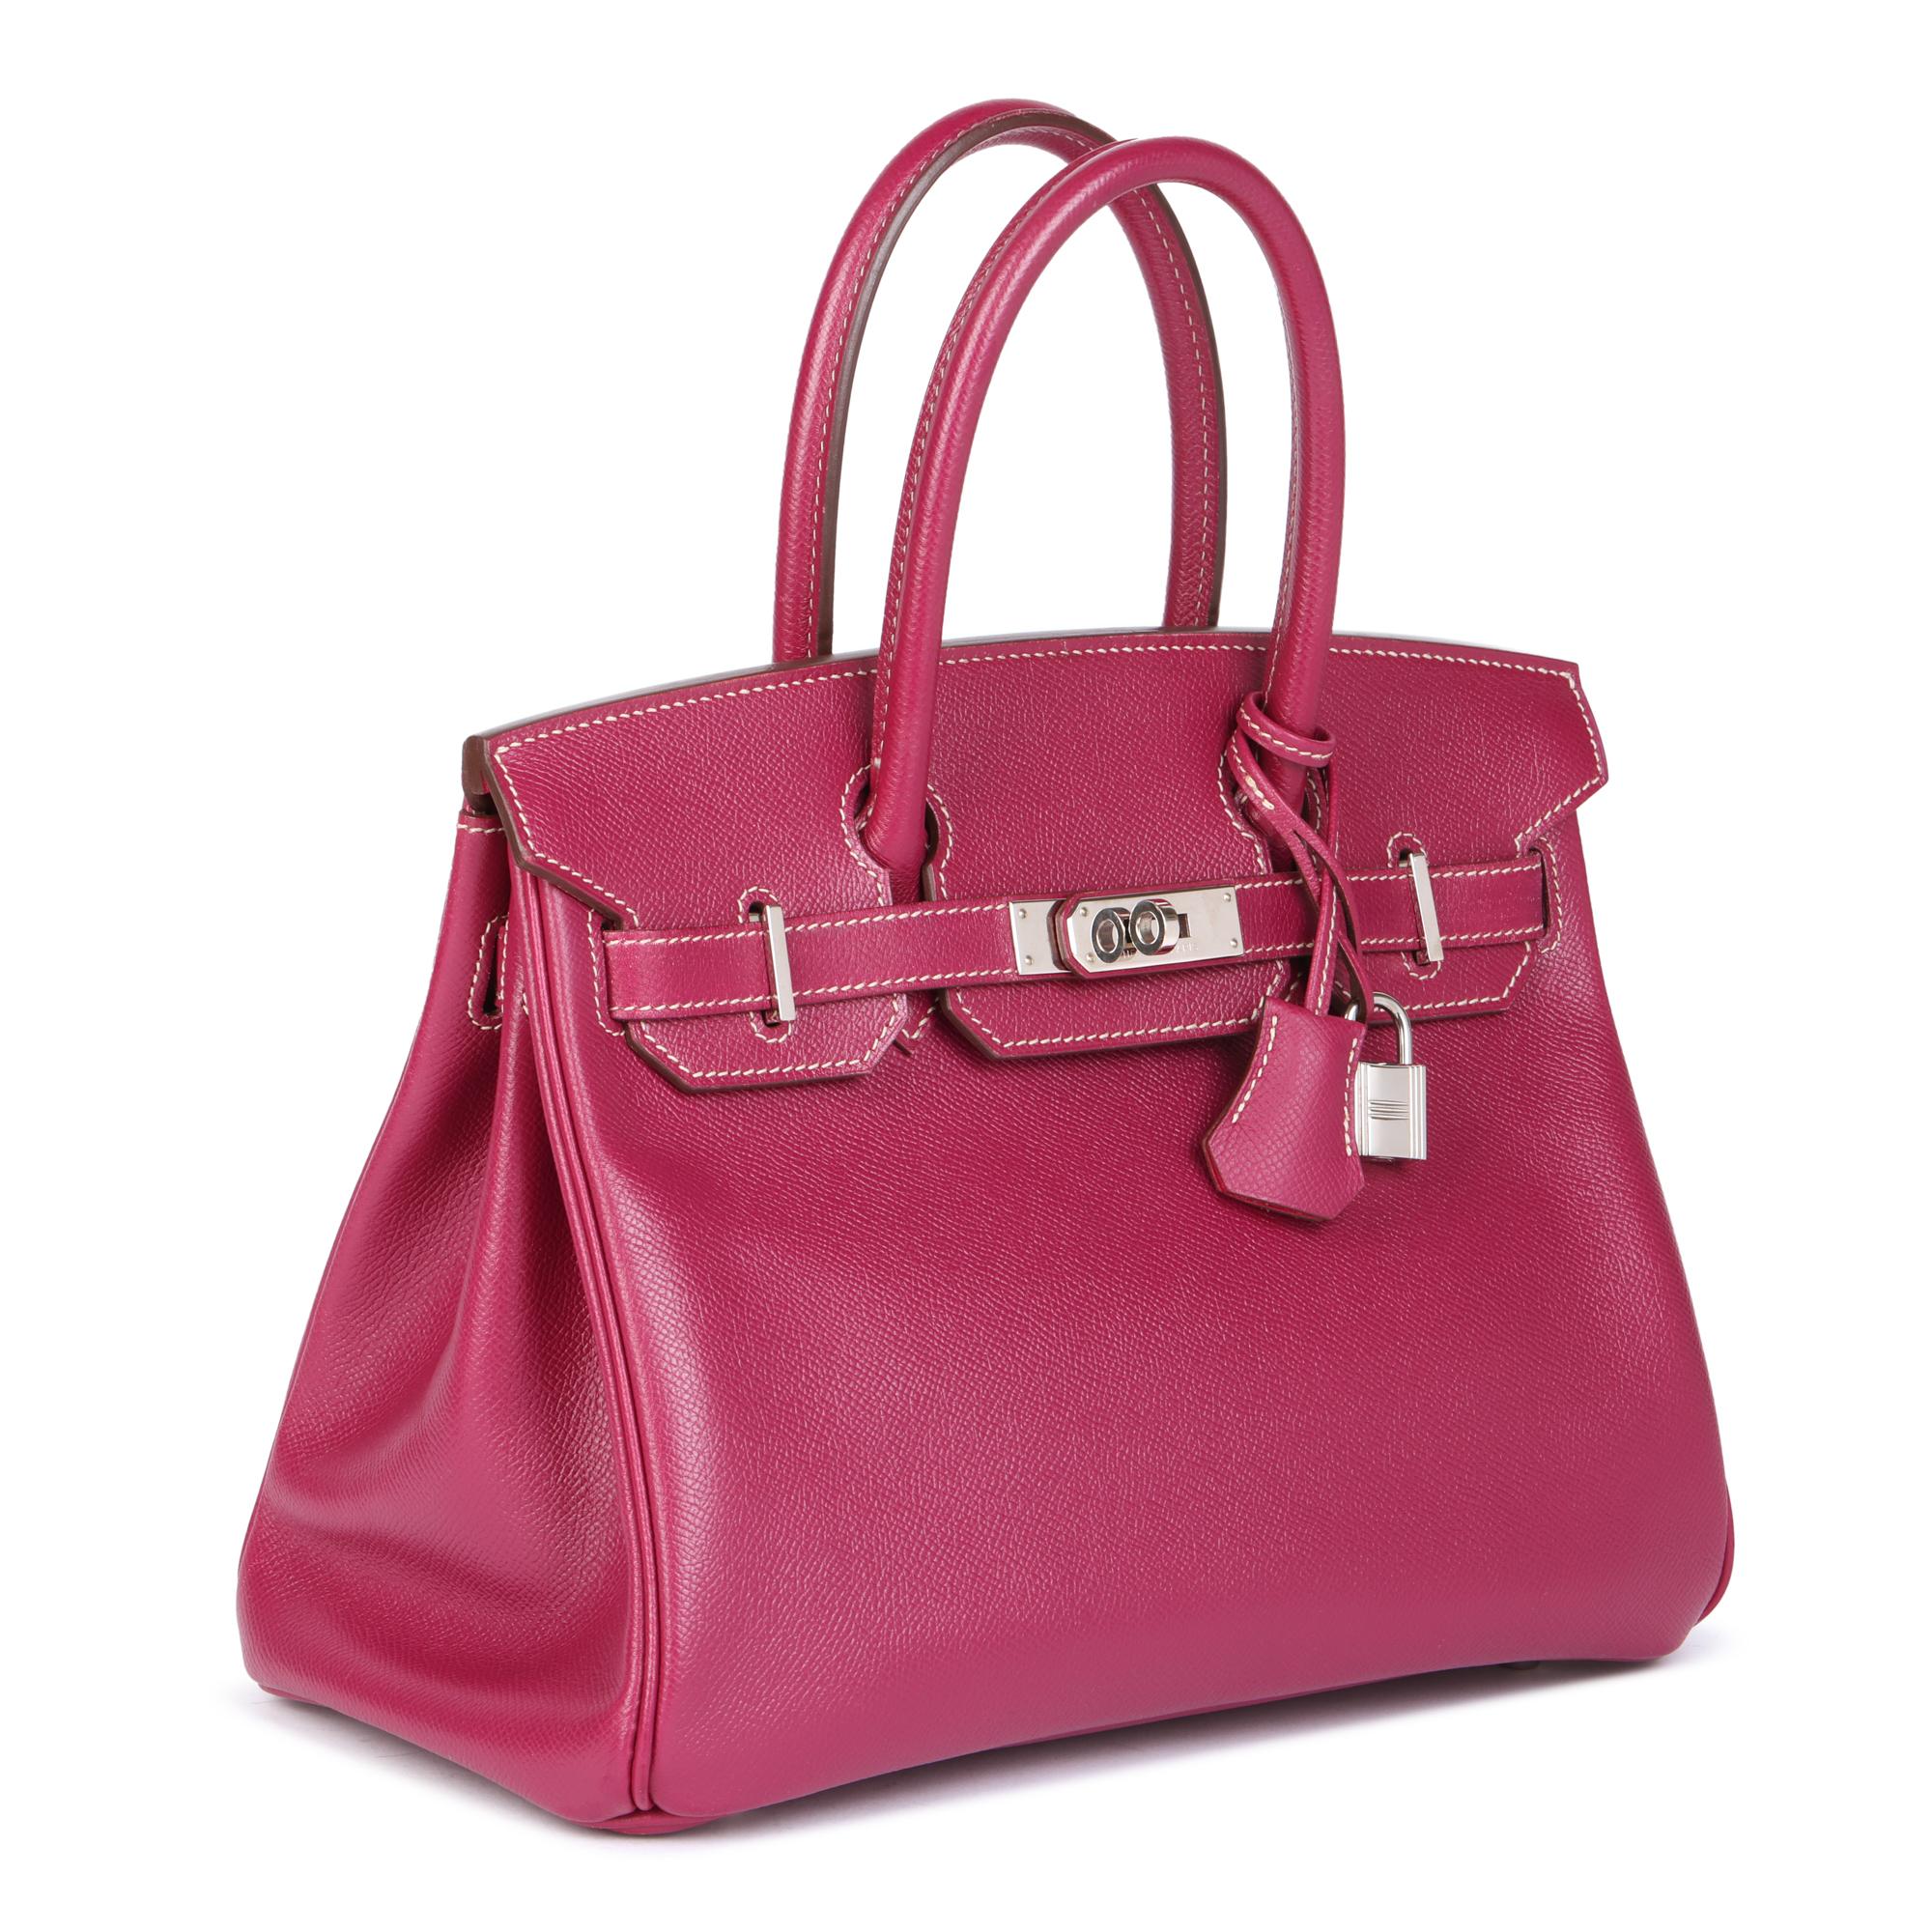 HERMÈS
Tosca & Rose Tyrien Epsom Leather Candy Collection Birkin 30cm Retourne

Serial Number: [Q]
Age (Circa): 2013
Accompanied By: Hermès Dust Bag, Padlock, Keys, Clochette, Protective Felt
Authenticity Details: Date Stamp (Made in France)
Gender: